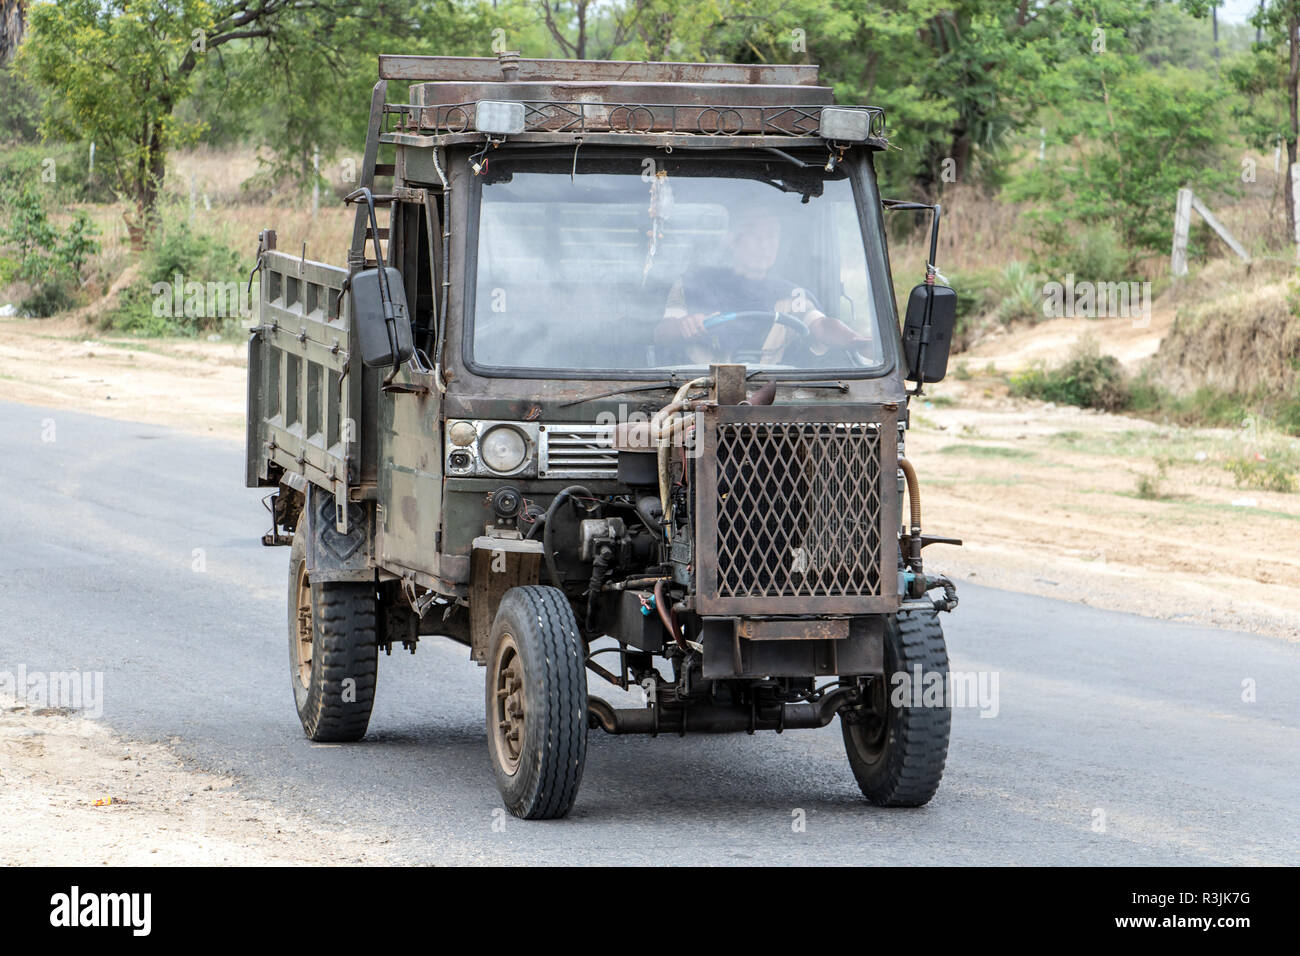 Chinese Manufactured tractor truck ride on road at countryside of Myanmar. Typical open-fronted battered lorry vehicle with air-cooled engine, Burma. Stock Photo